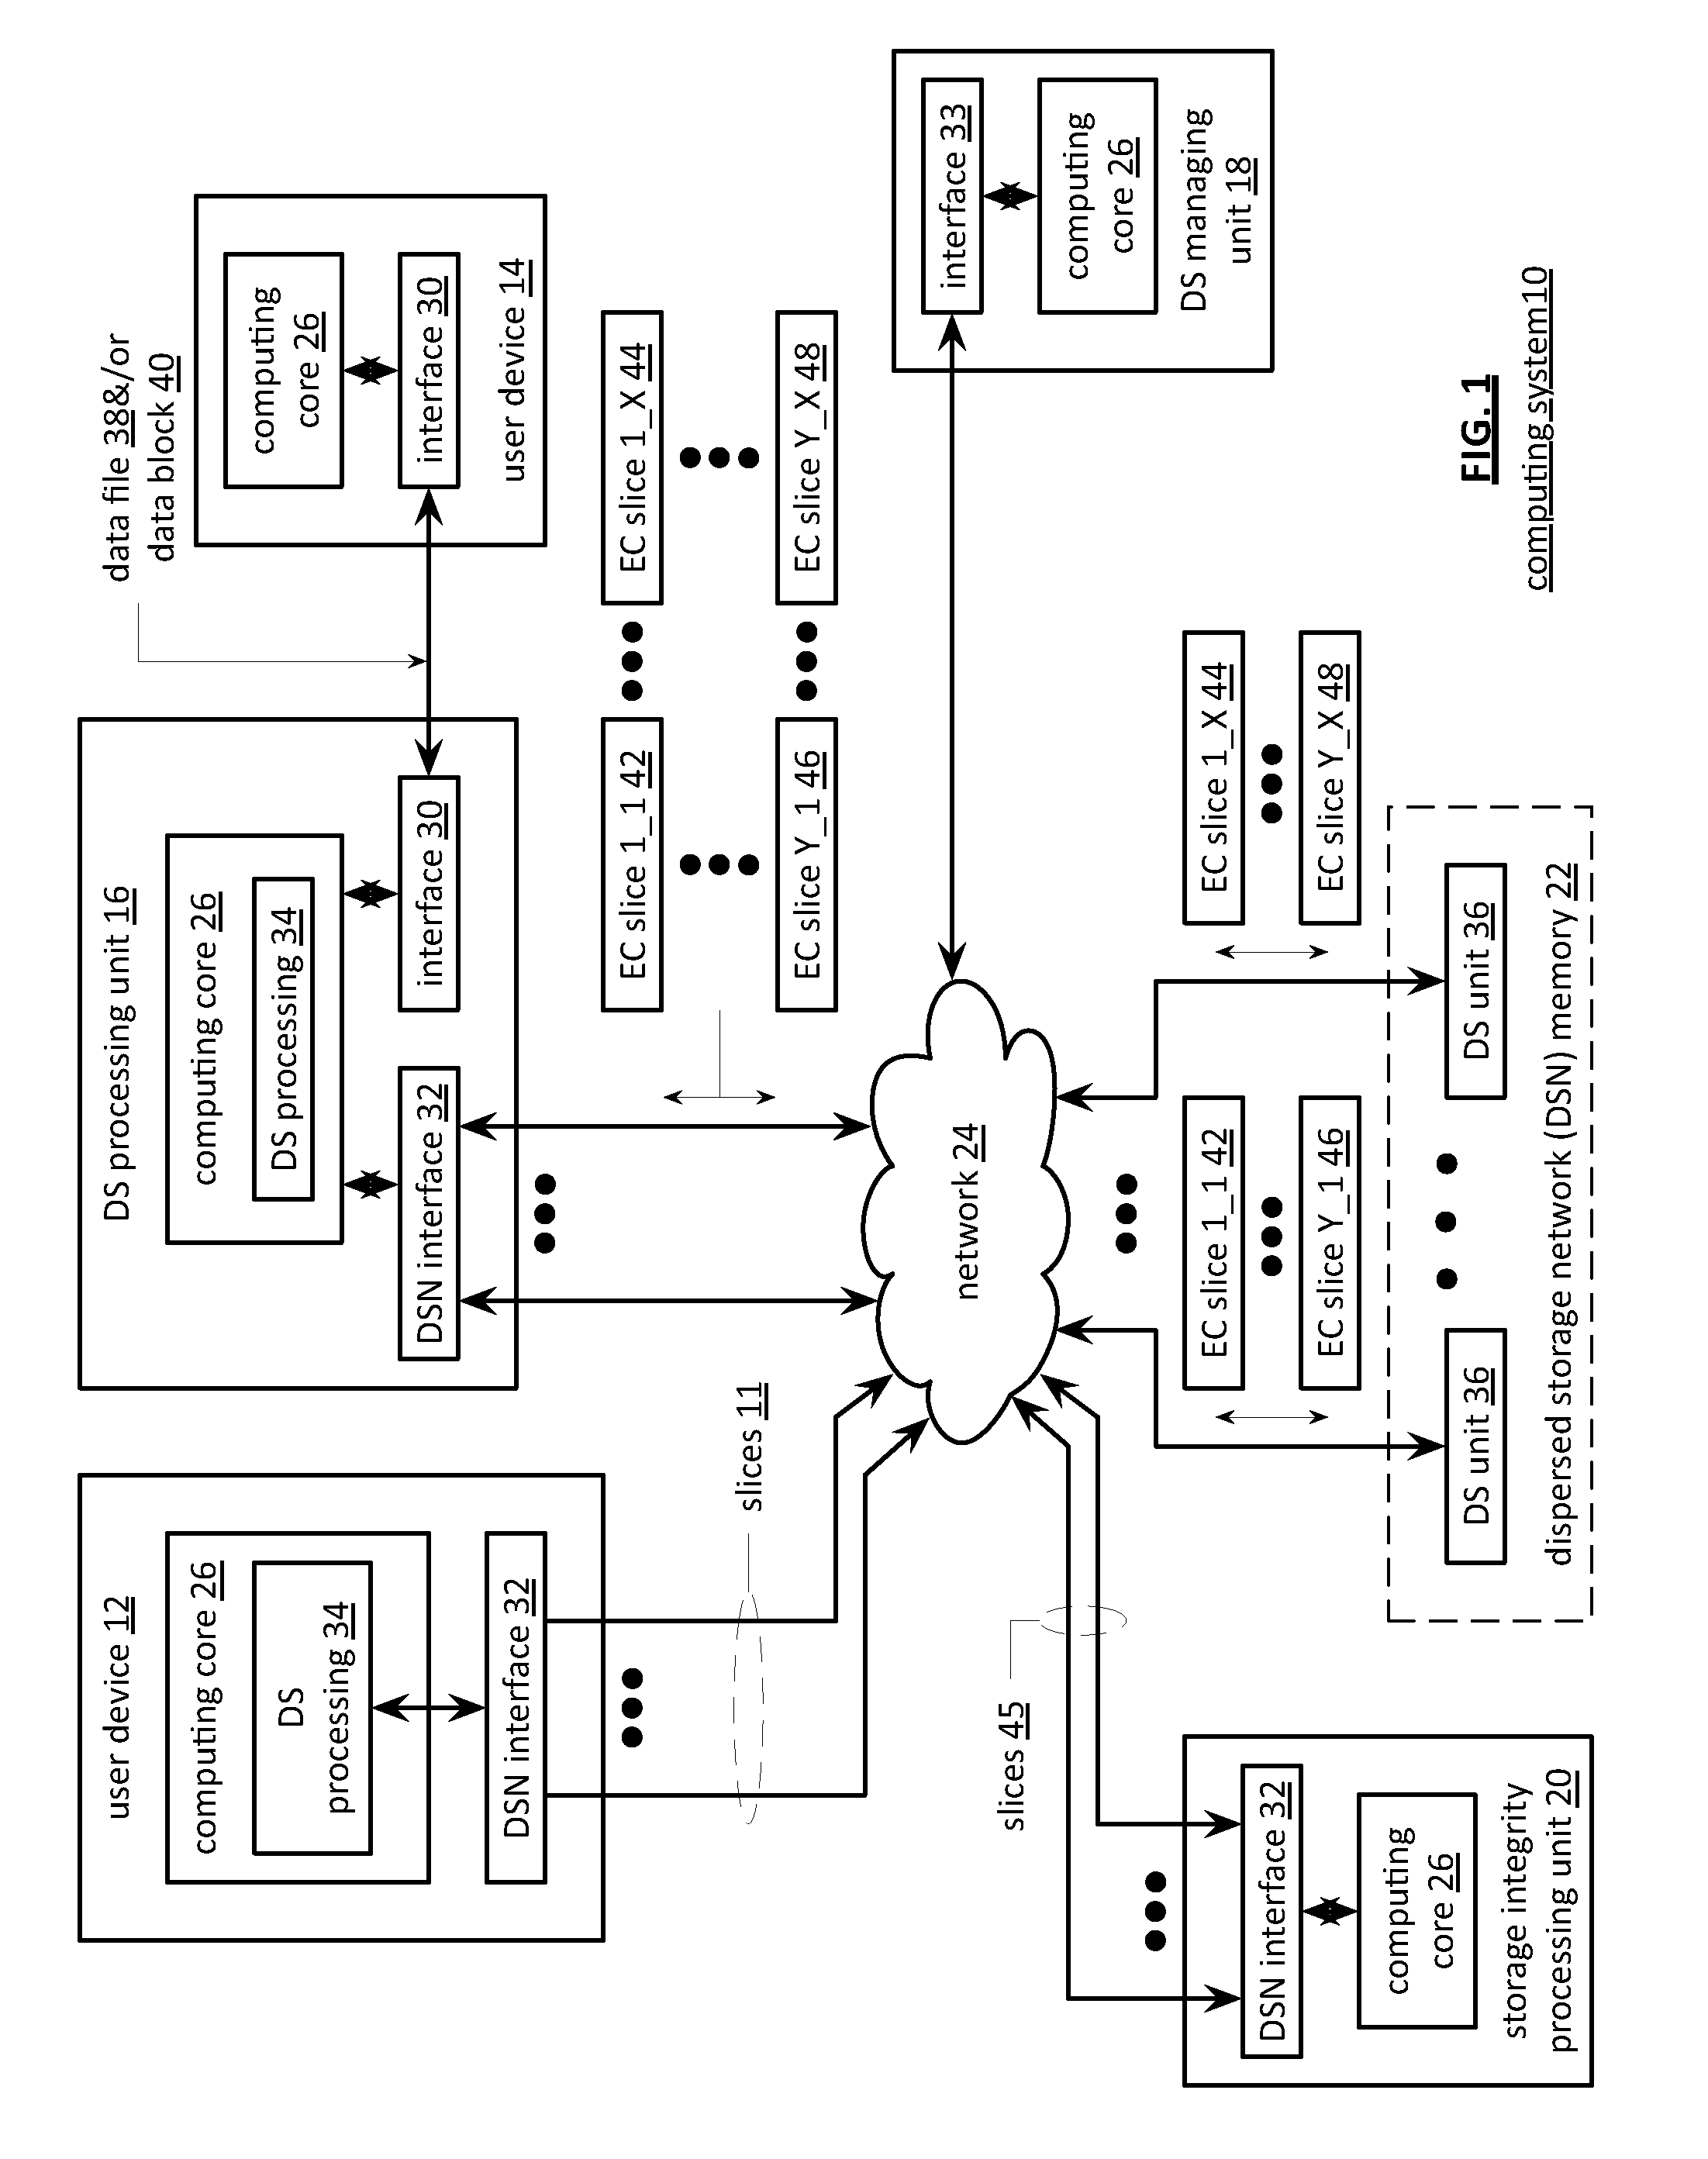 Retrieving data from a dispersed storage network in accordance with a retrieval threshold